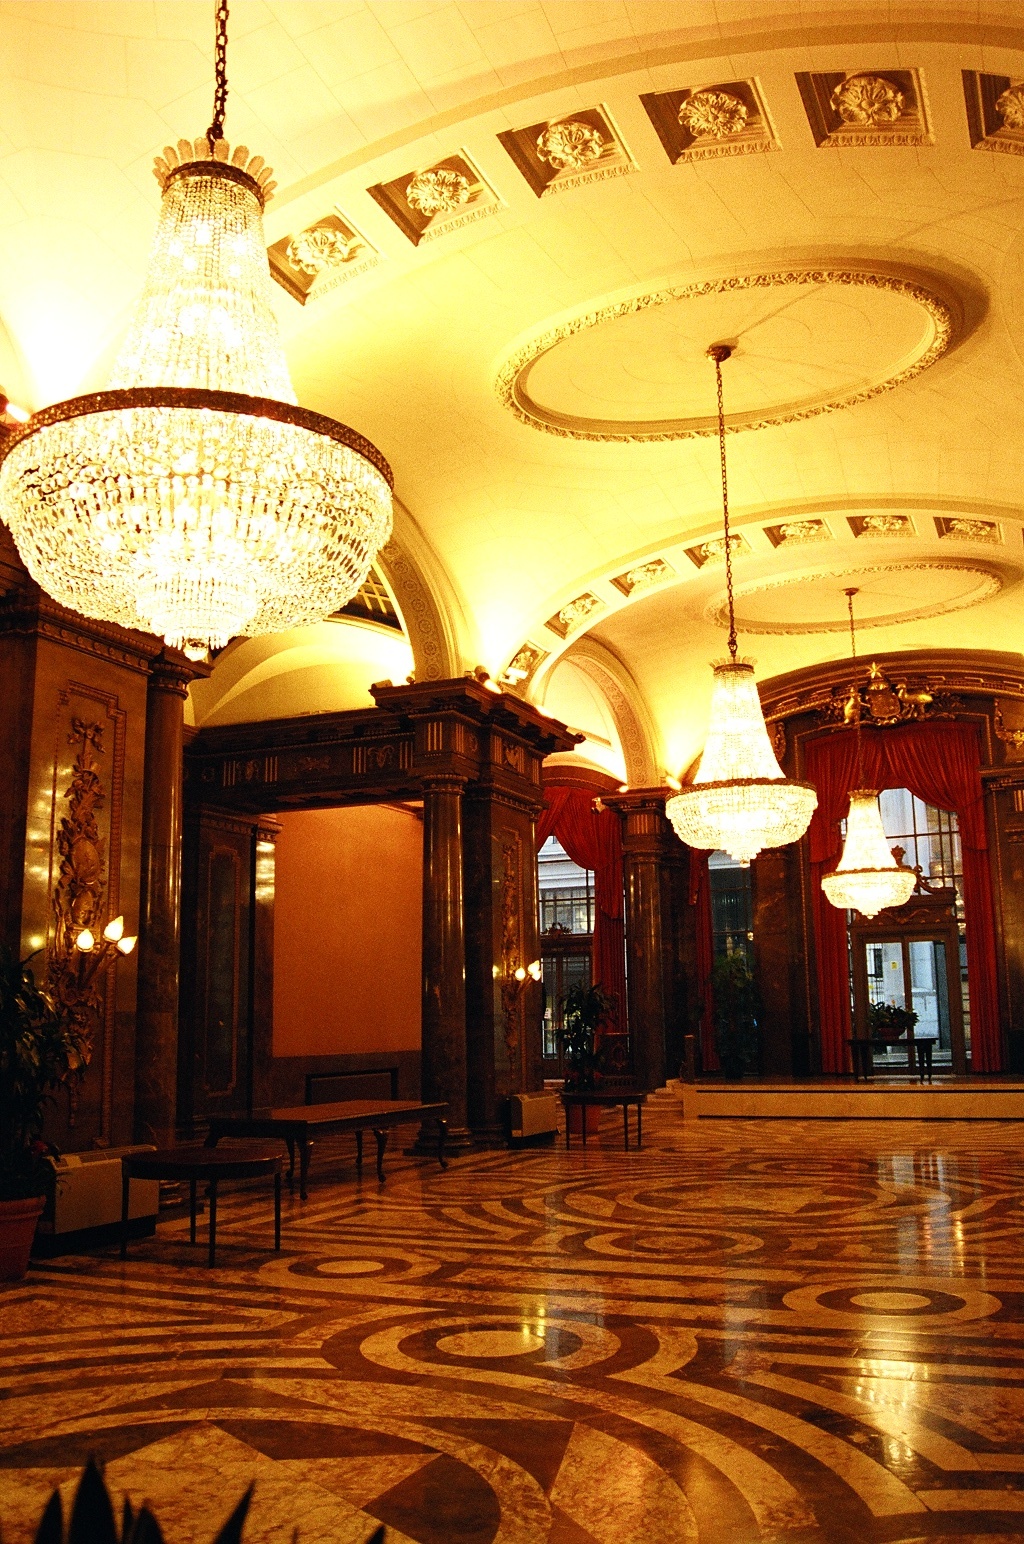 the inside of an elegant building with chandeliers and decor